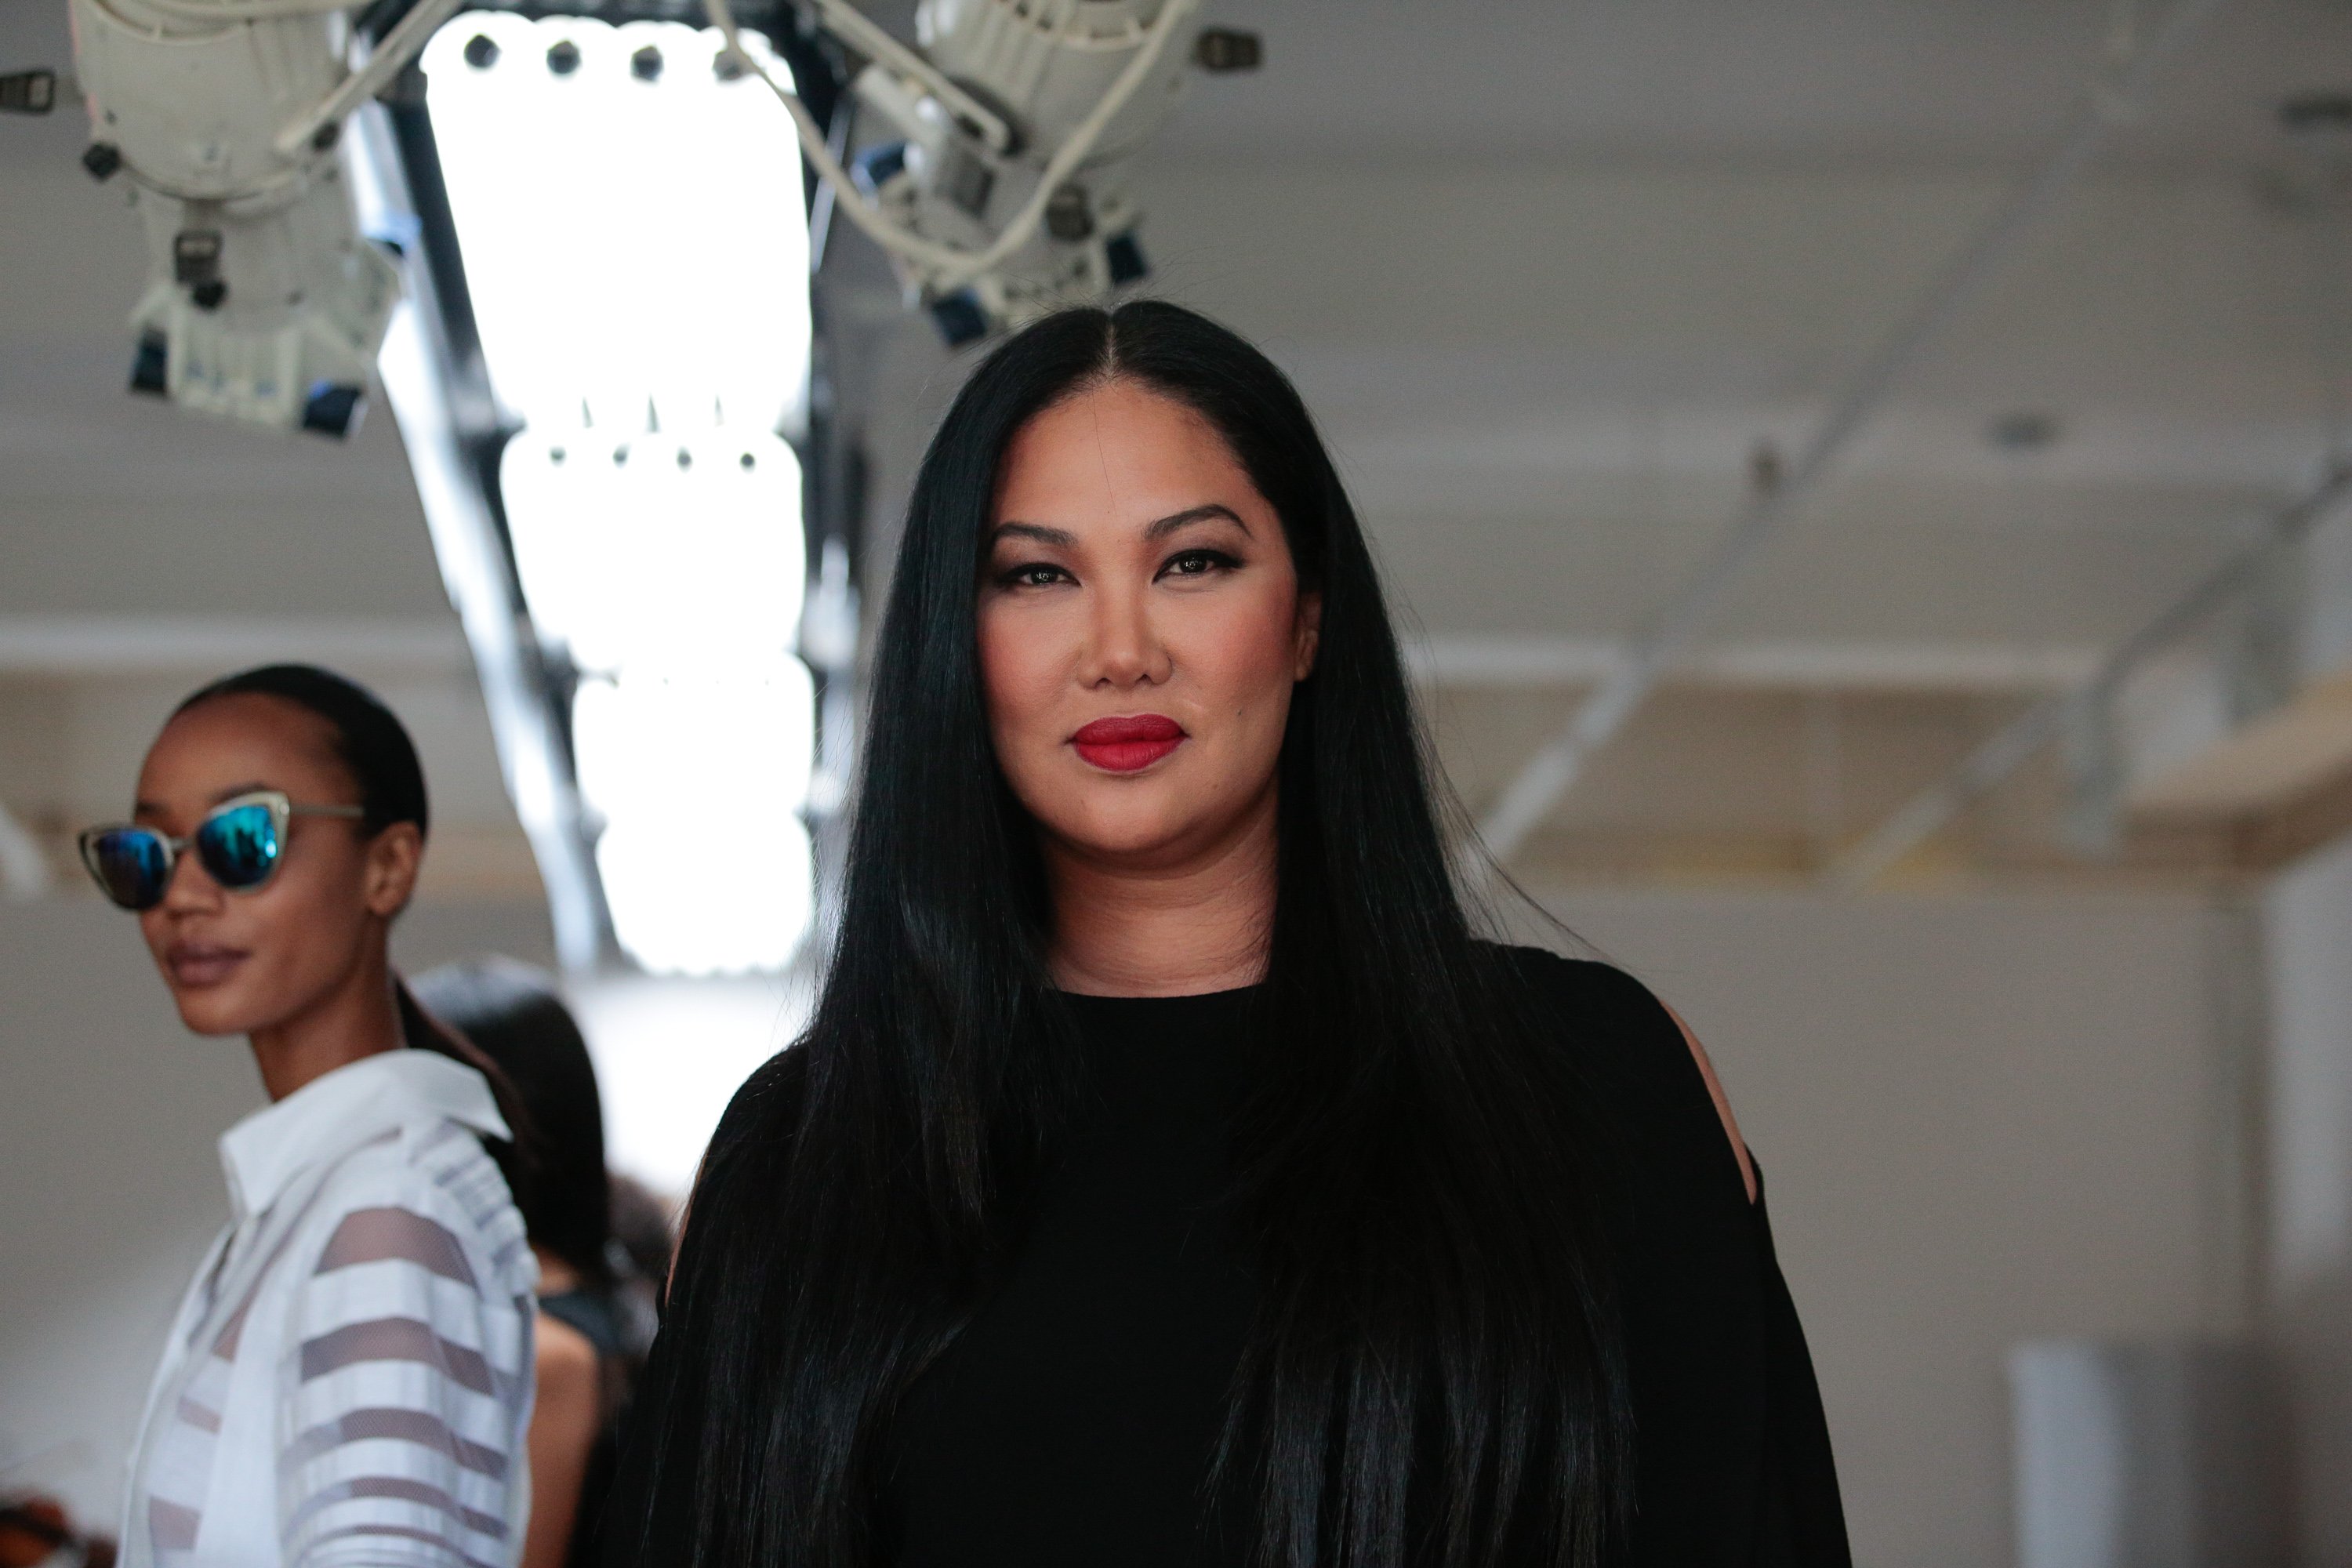 Kimora Lee Simmons pictured during New York Fashion Week at The Gallery, Skylight at Clarkson Square on September 14, 2016 in New York City. | Source: Getty Images